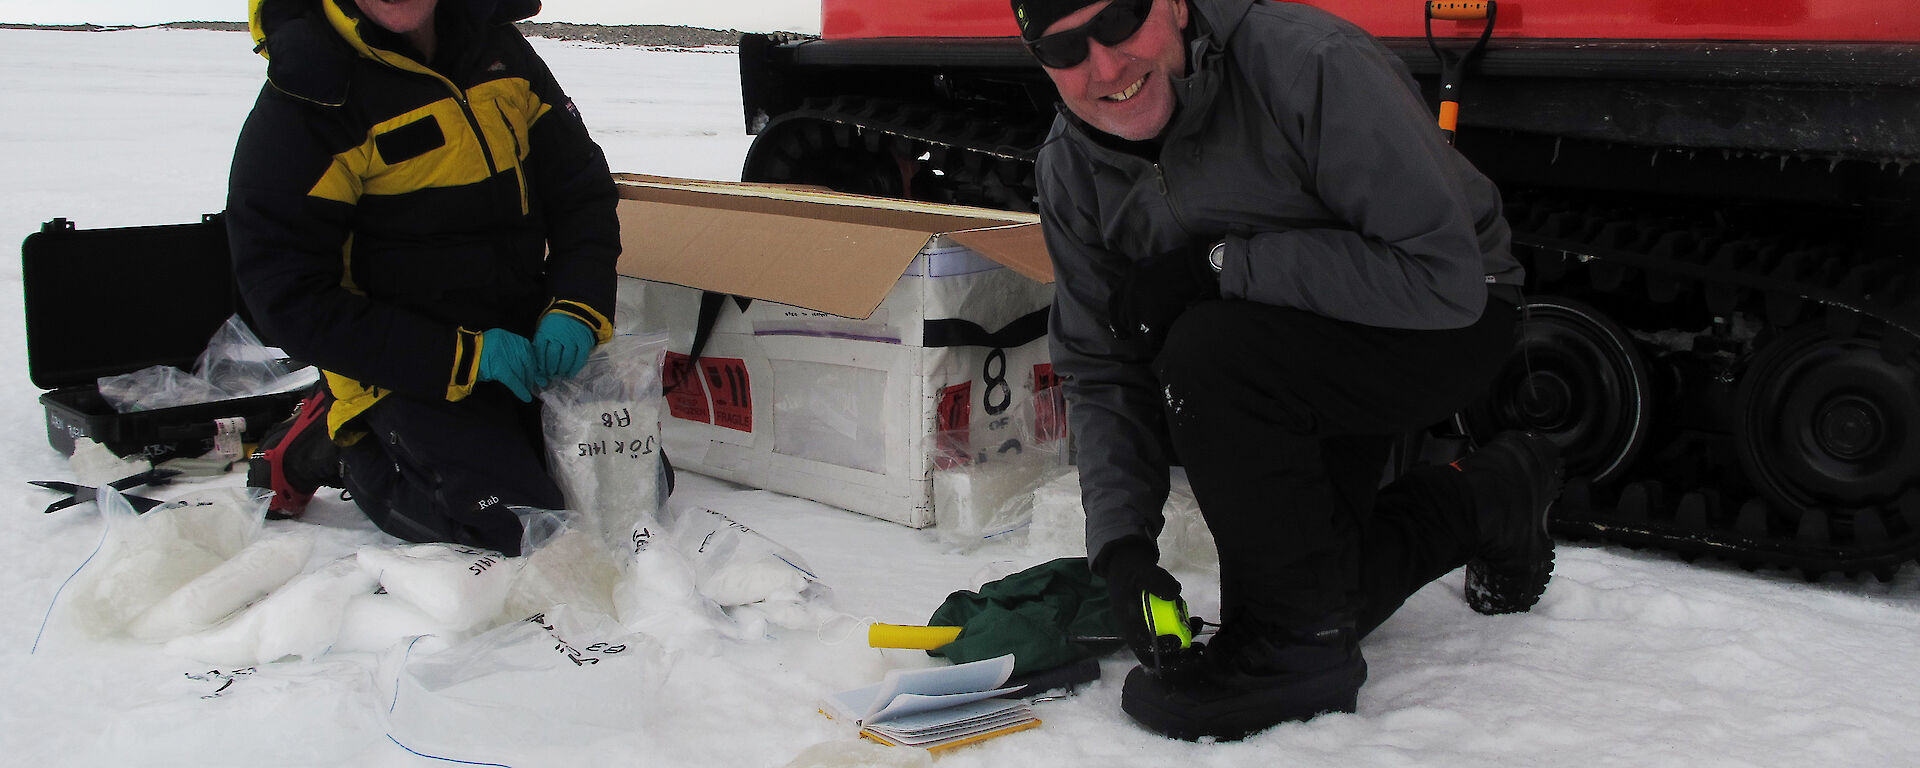 Dr David Etheridge and Dr Andrew Smith take samples of the rare sub-glacial water eruption for analysis